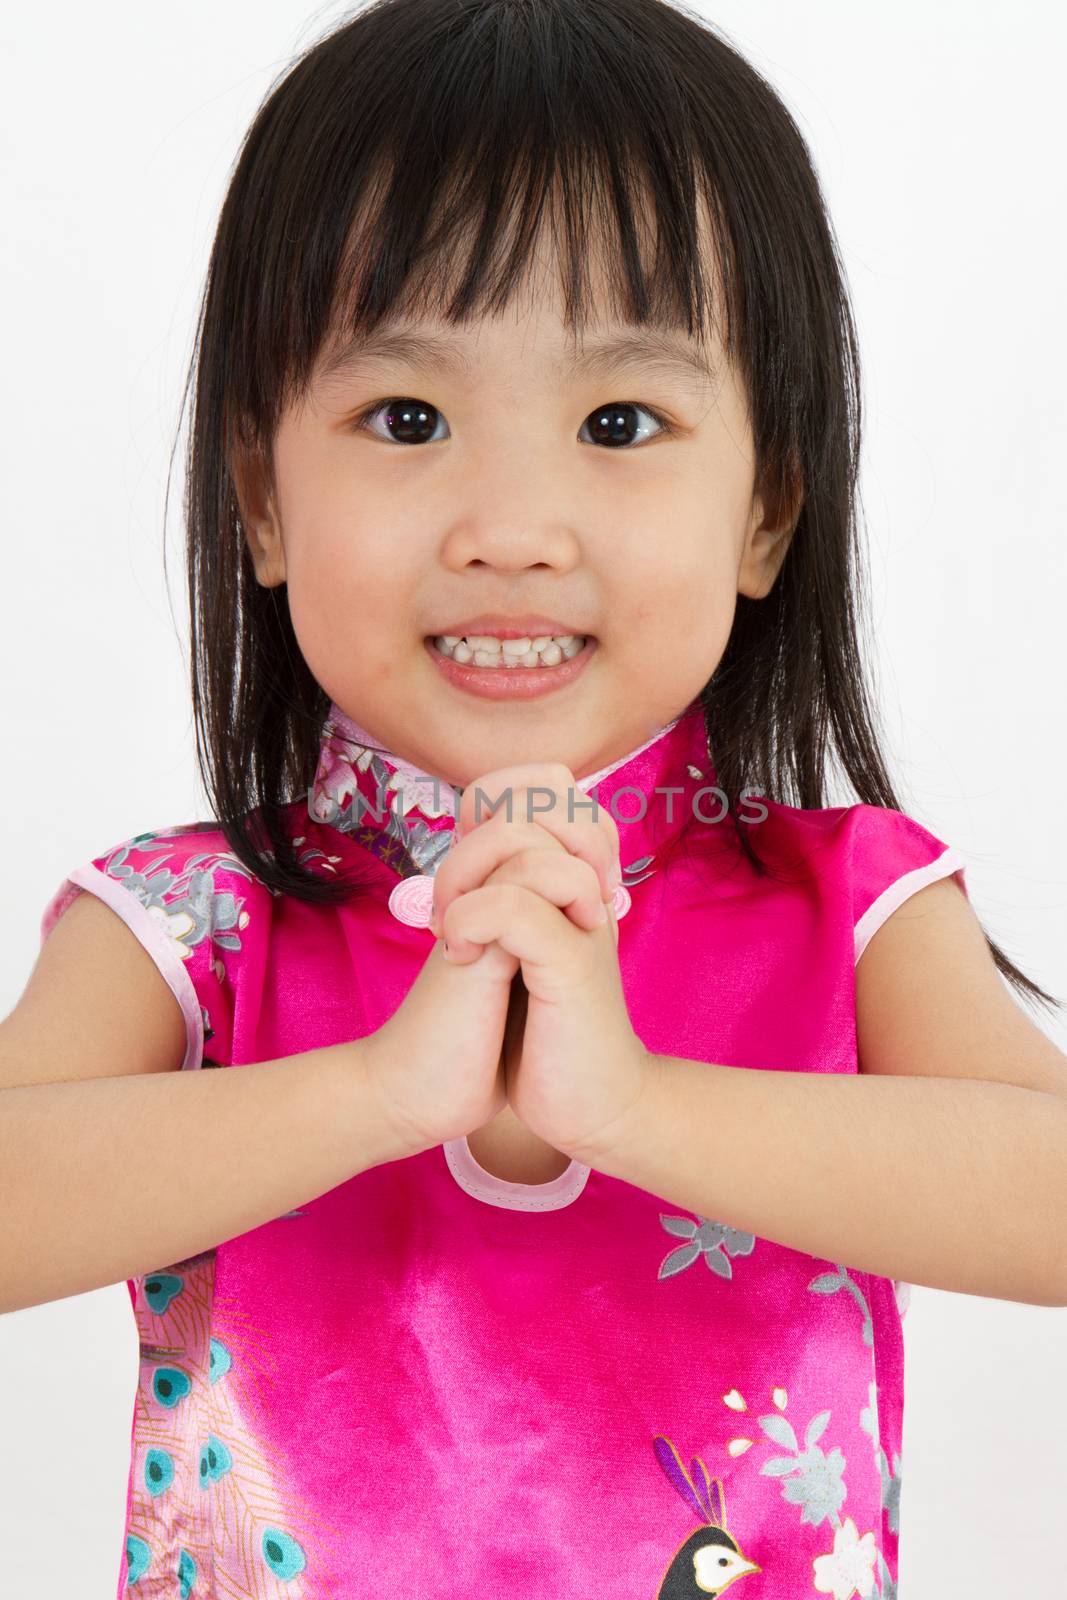 Chinese Little Girl wearing Cheongsam with greeting gesture in plain white background.